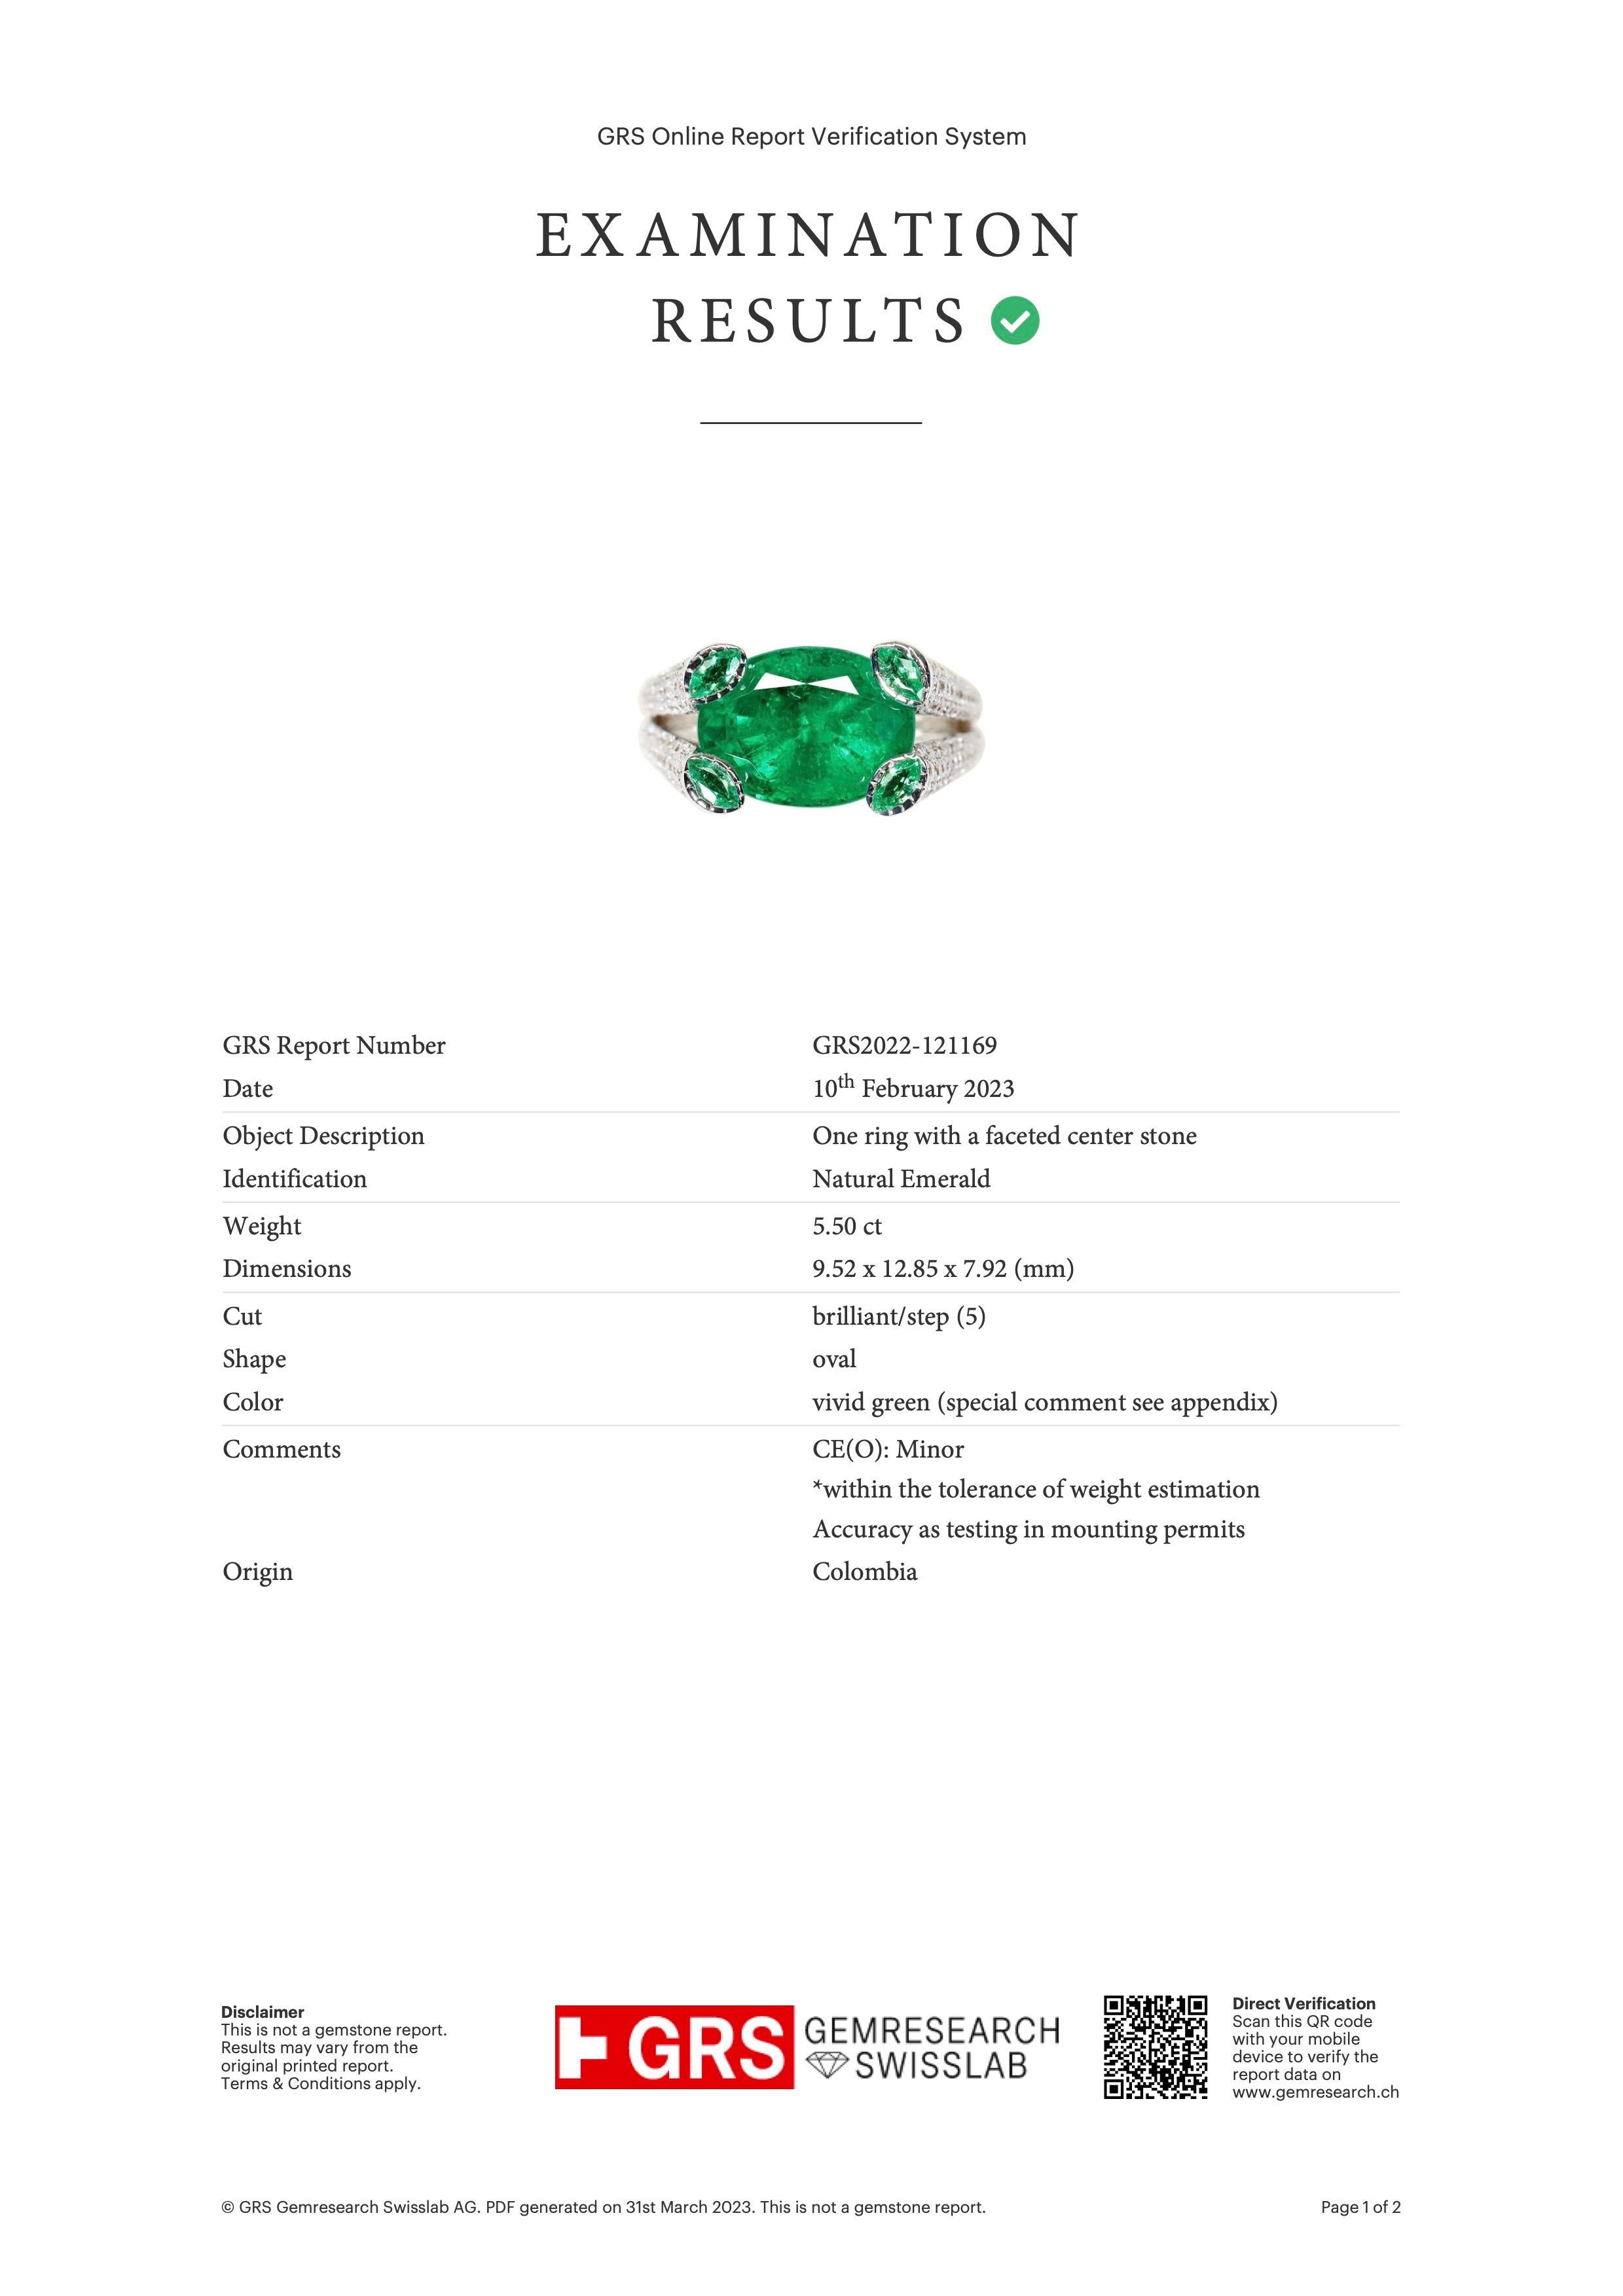 Colombian 5.50 Cts GRS Emerald Ring with Diamonds in 18K White Gold For Sale 9